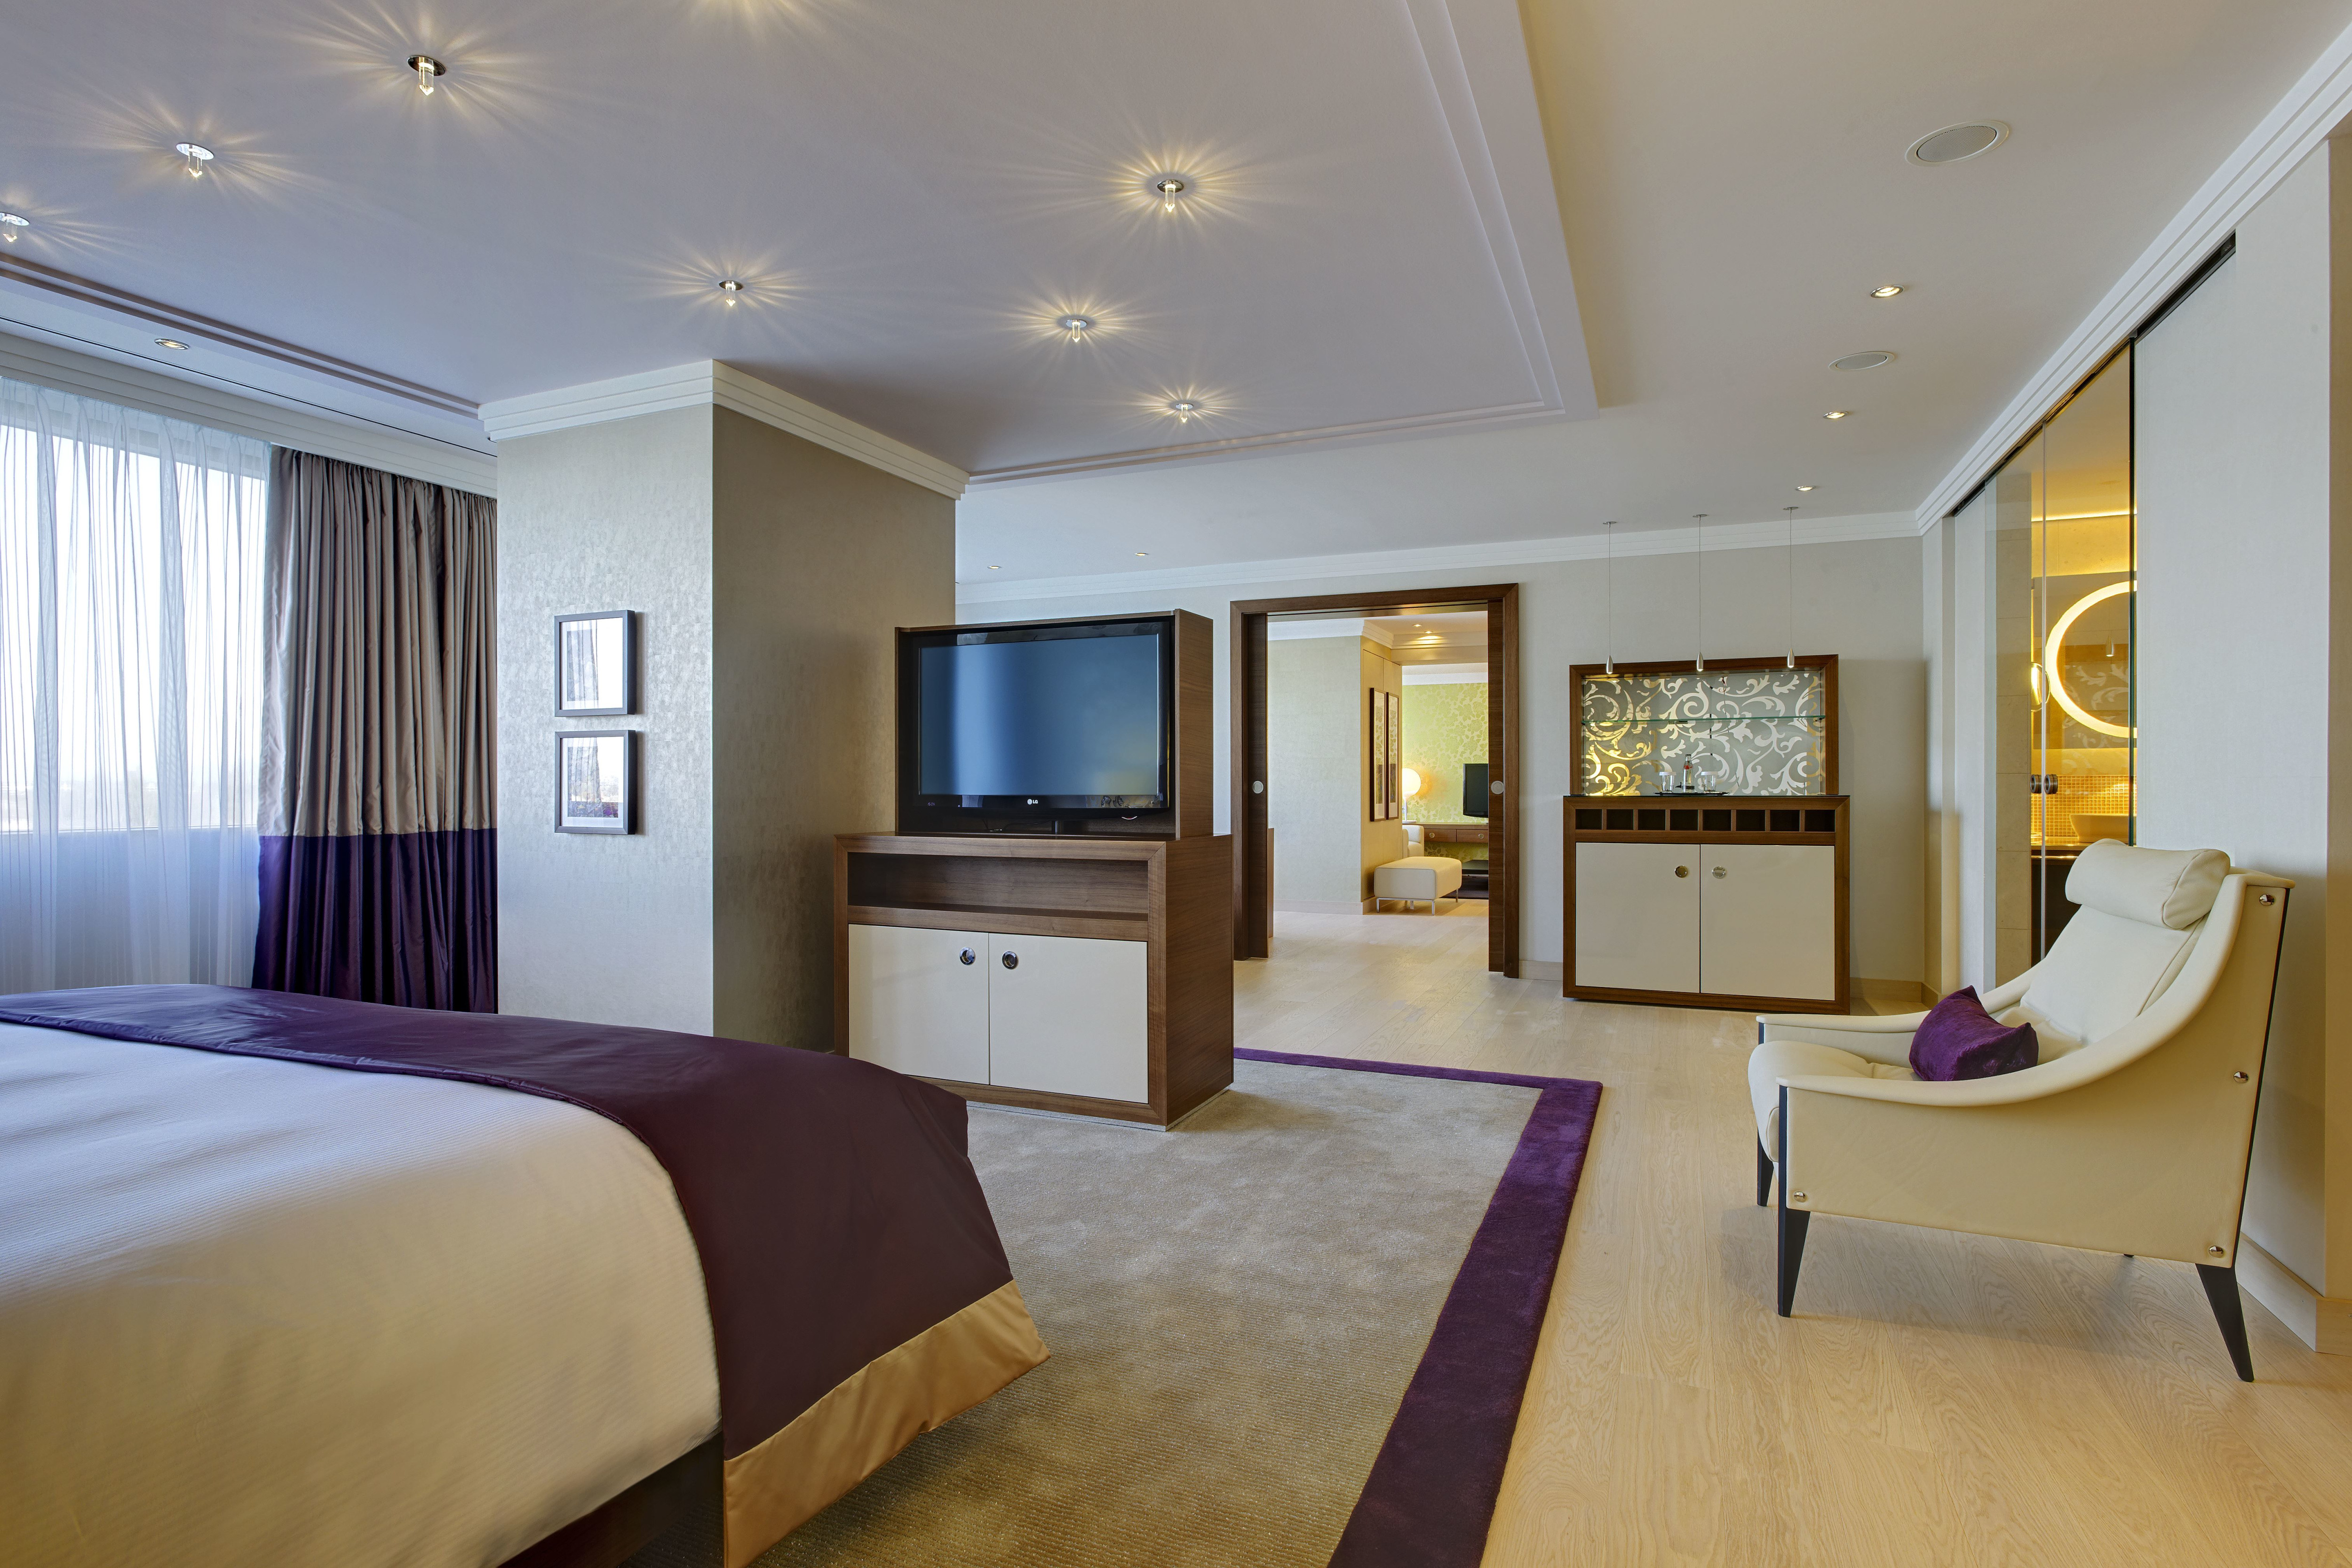 Large Bed HDTV and Armchair in Presidential Suite